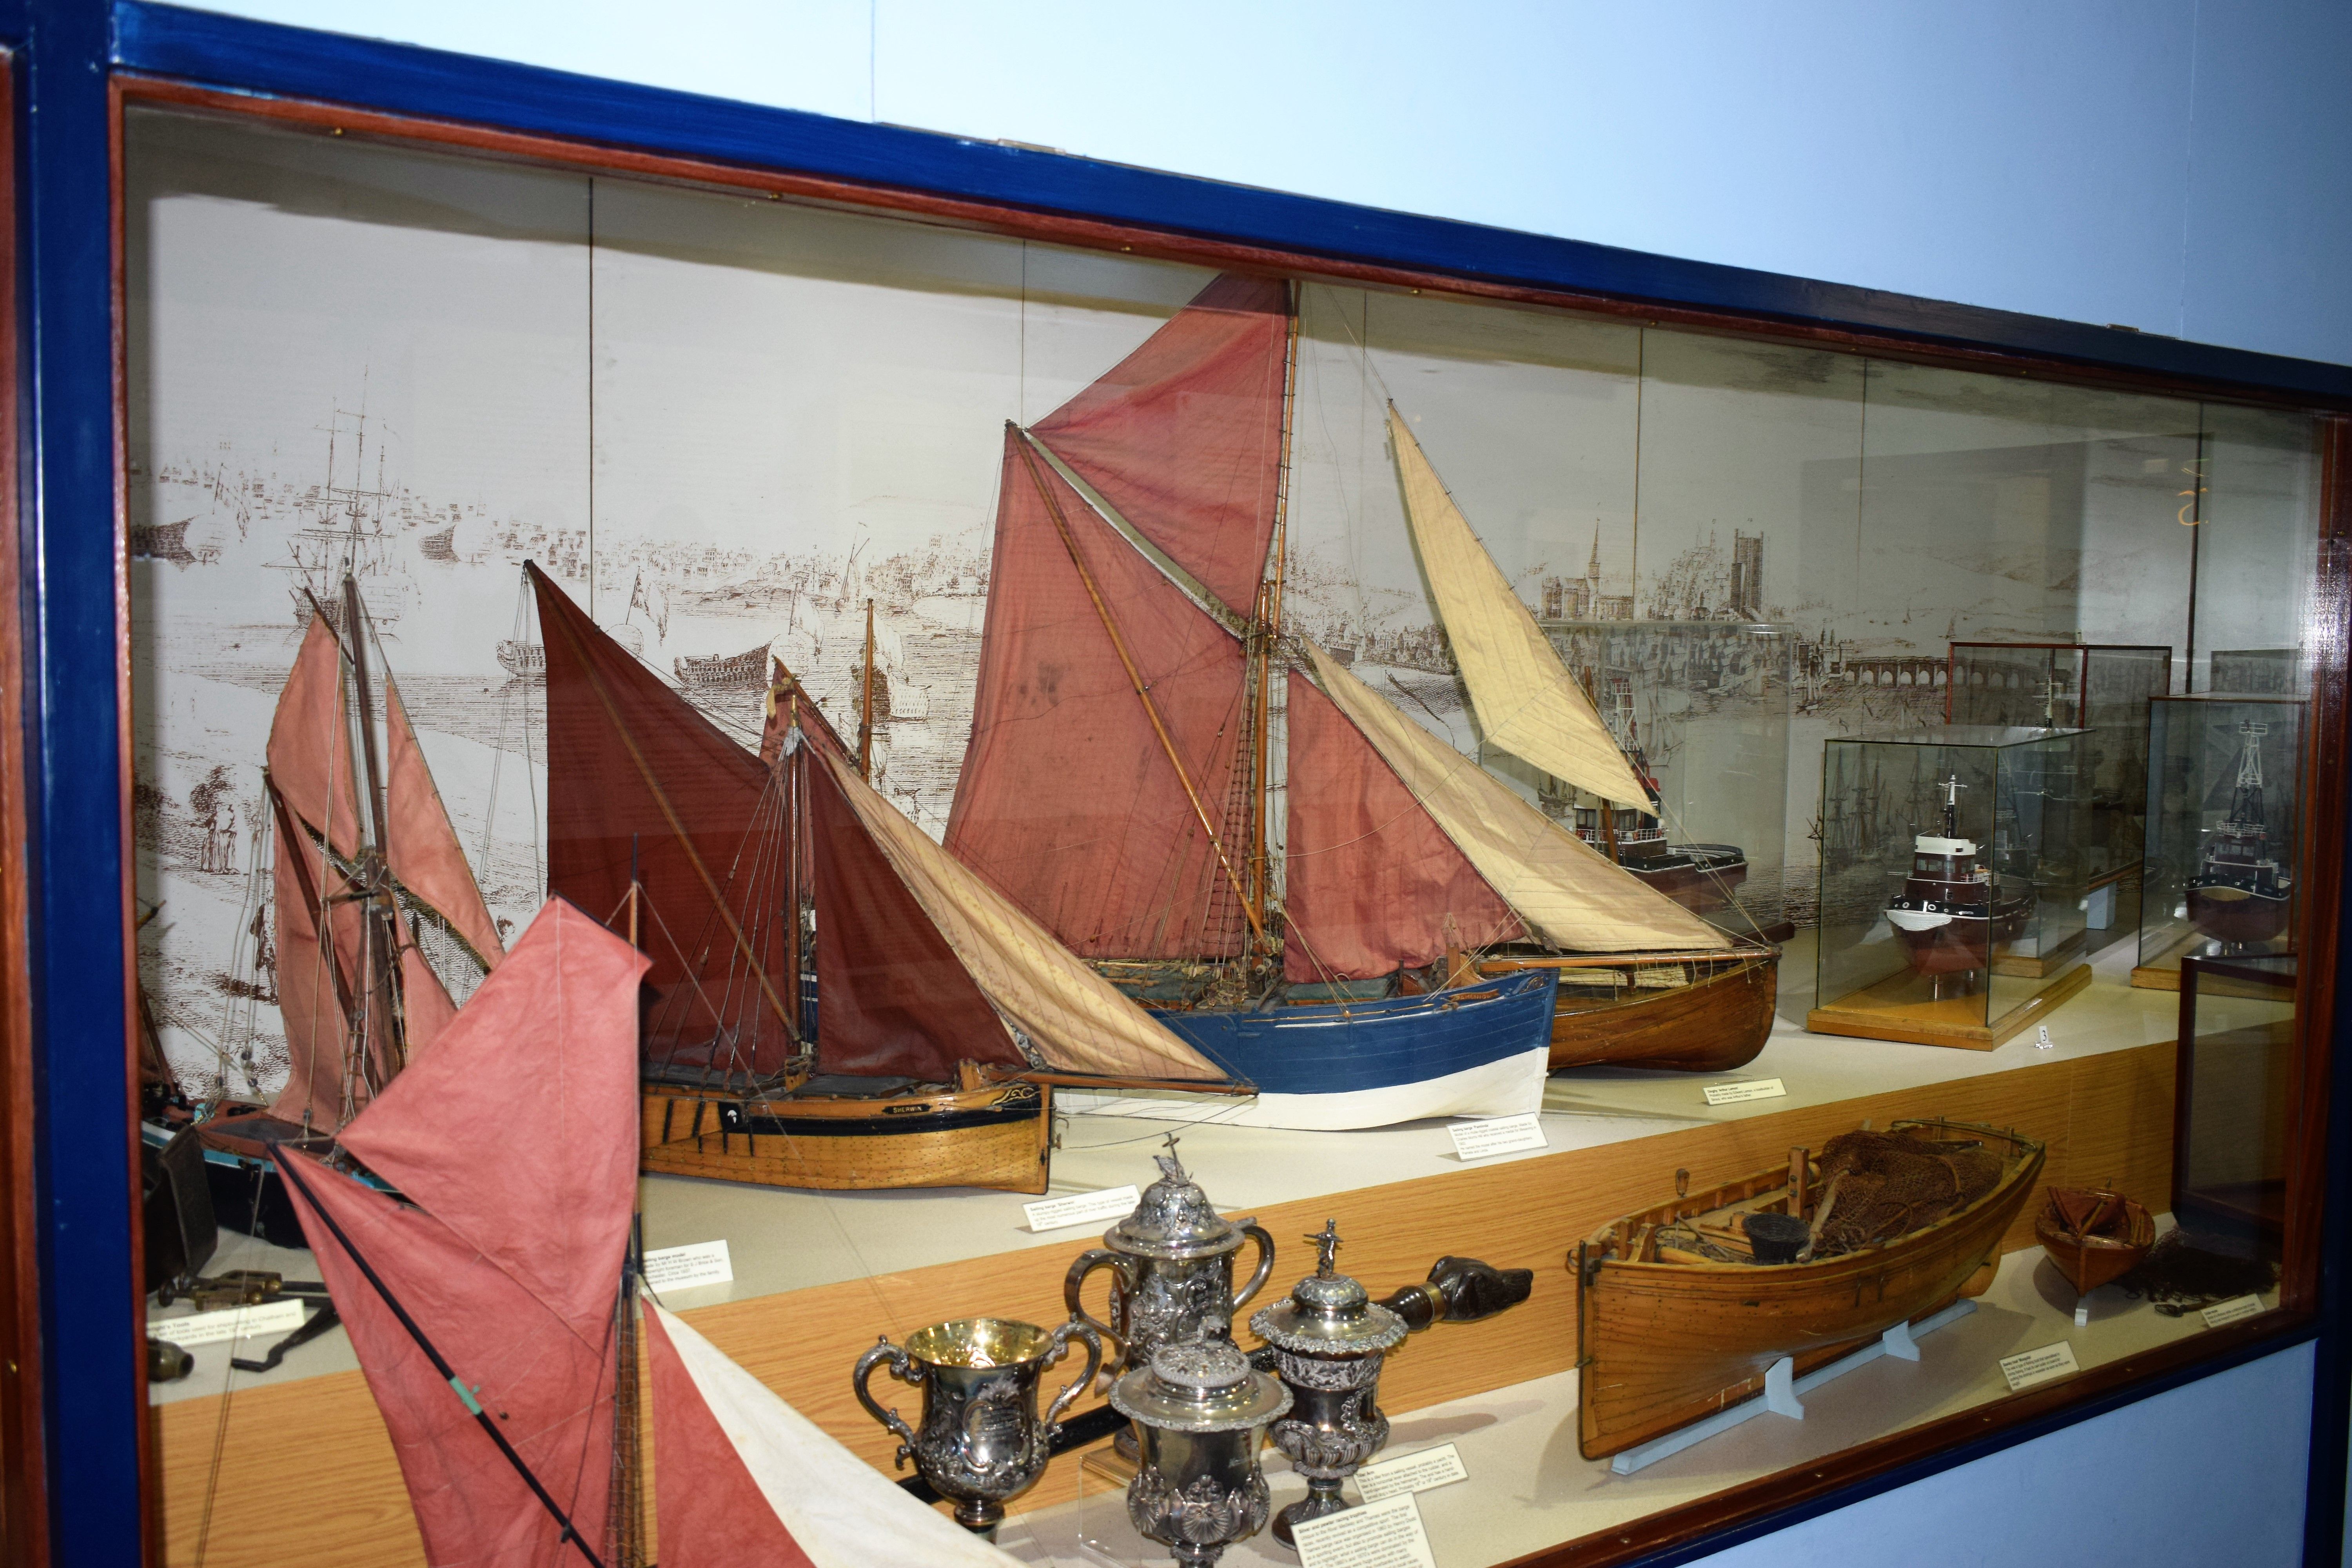 Models of boats that used to frequent the Medway River near Rochester